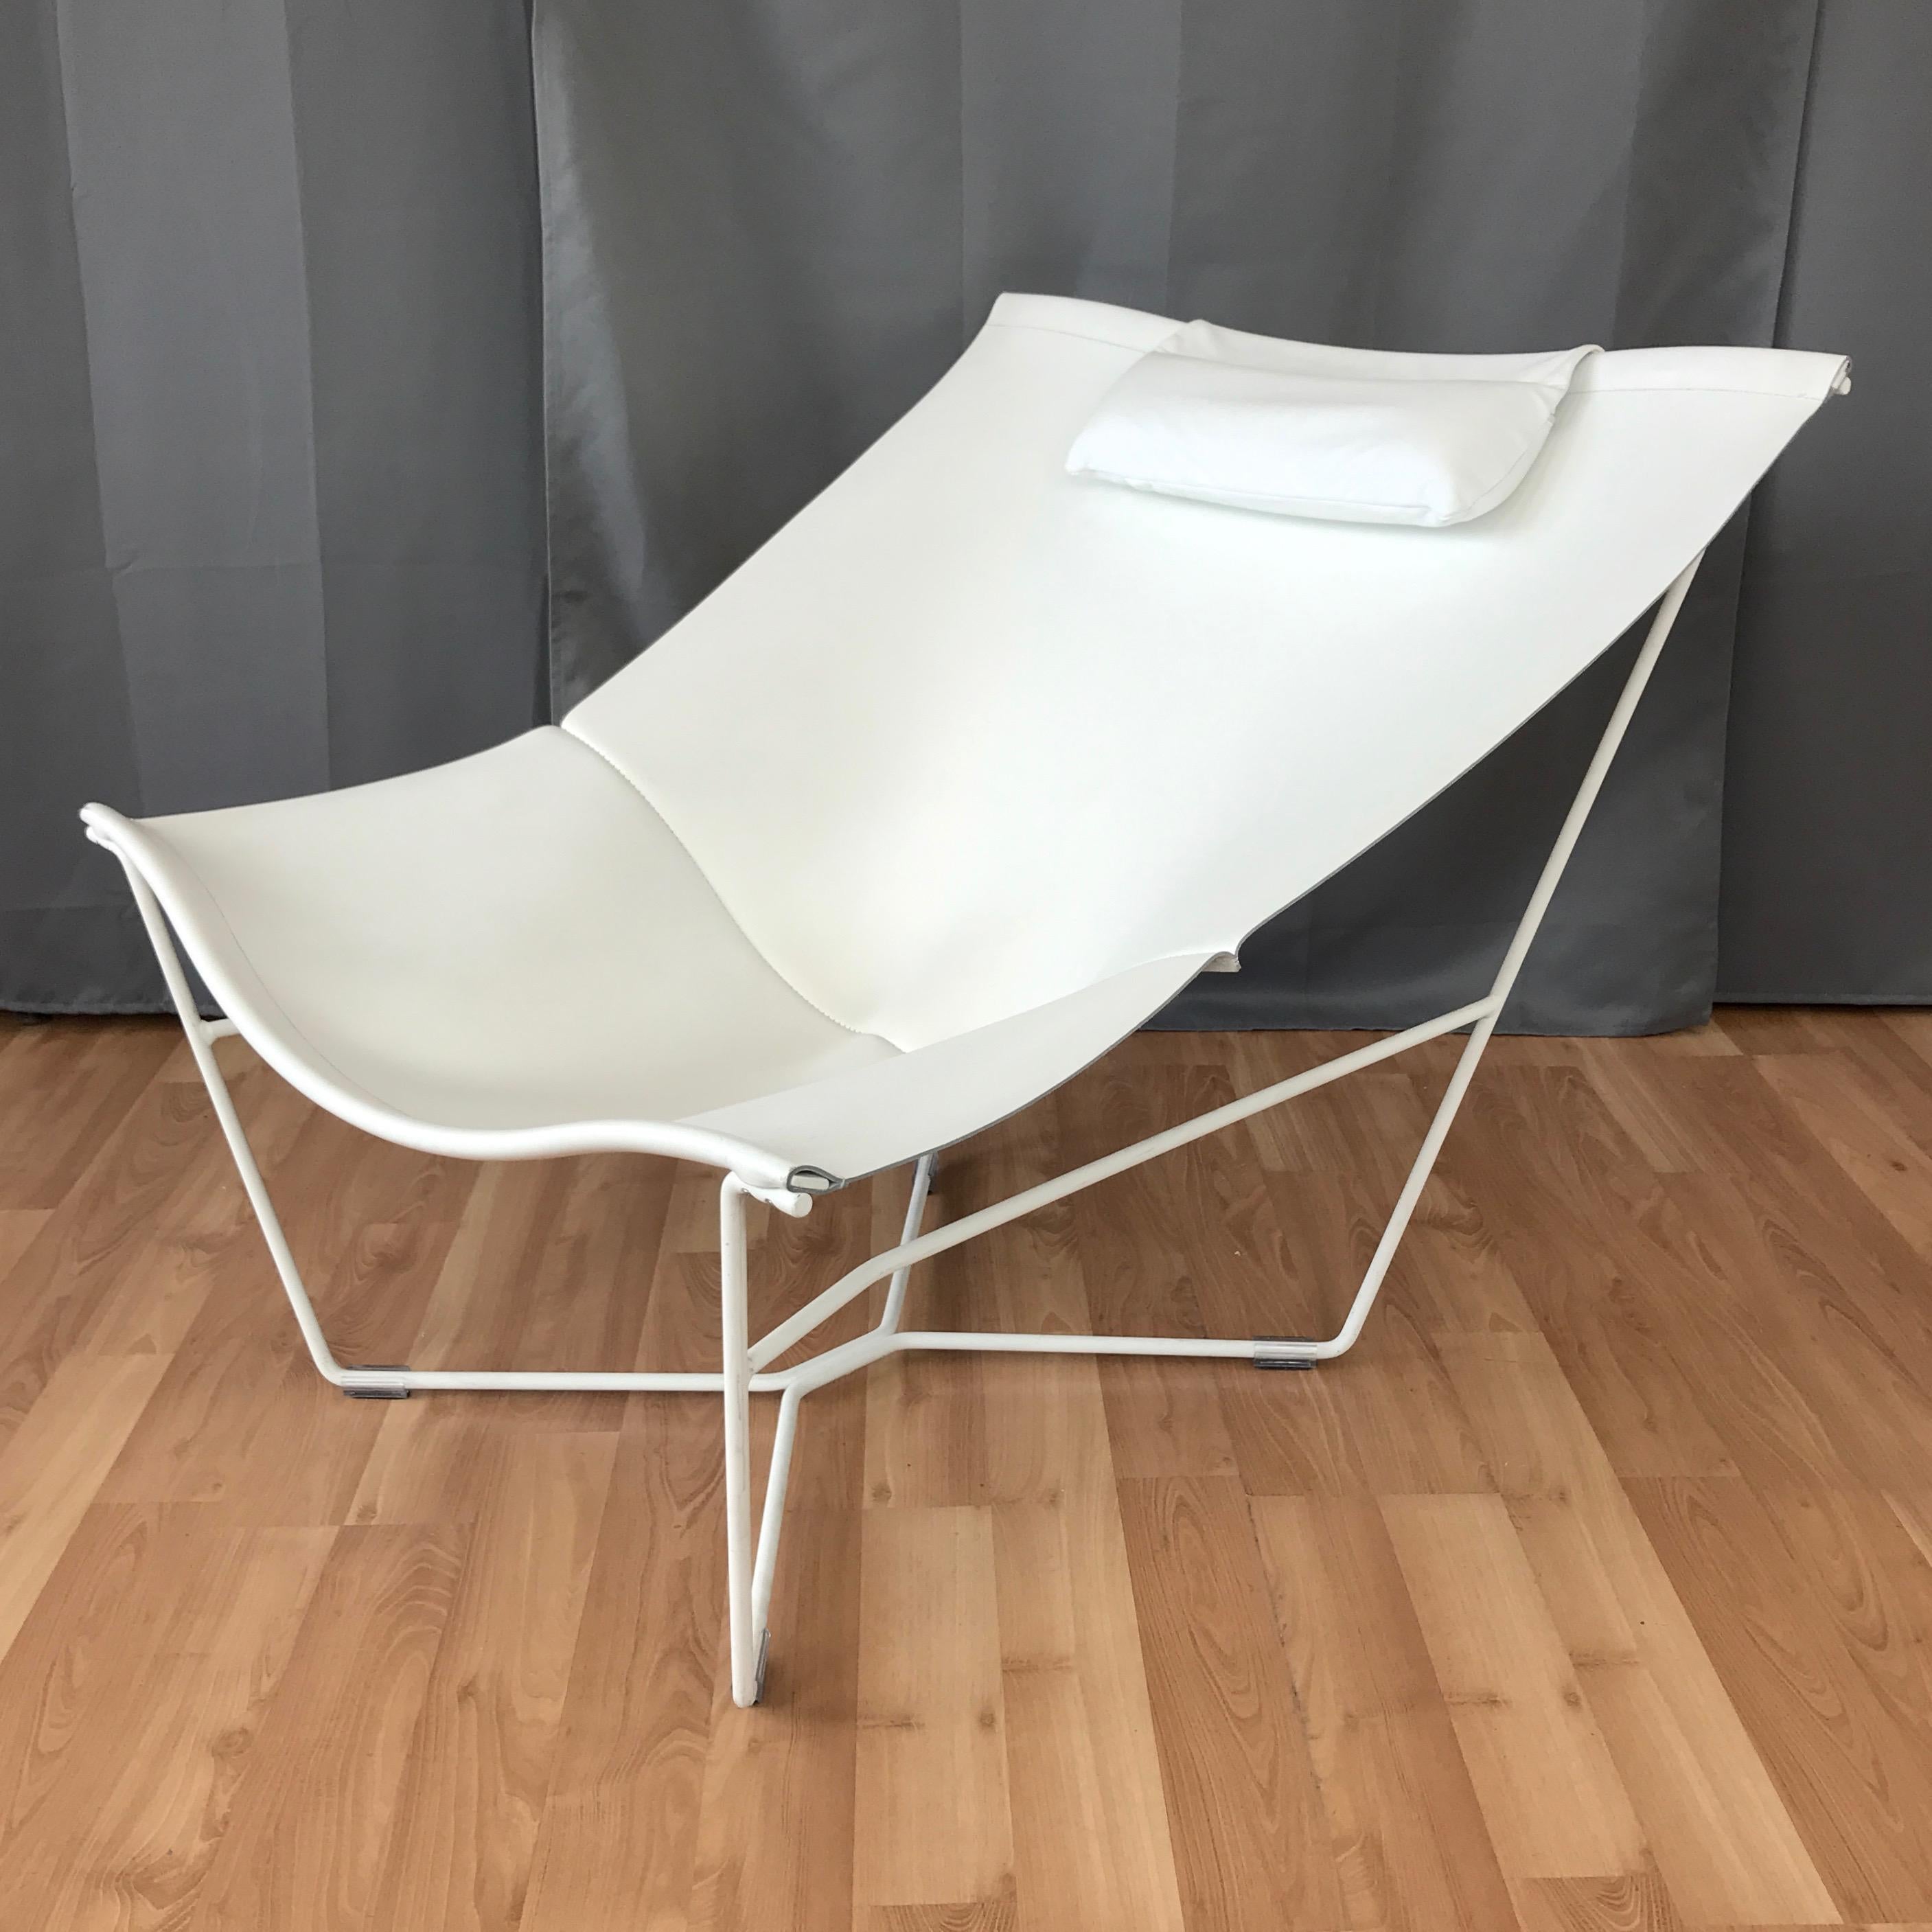 A white leather and steel Semana Chair No. 501 by David Weeks for Habitat UK.

A more comfortable modernist take on the classic butterfly chair, its expansive low-slung seat of bright white tailored leather is accented by a detached